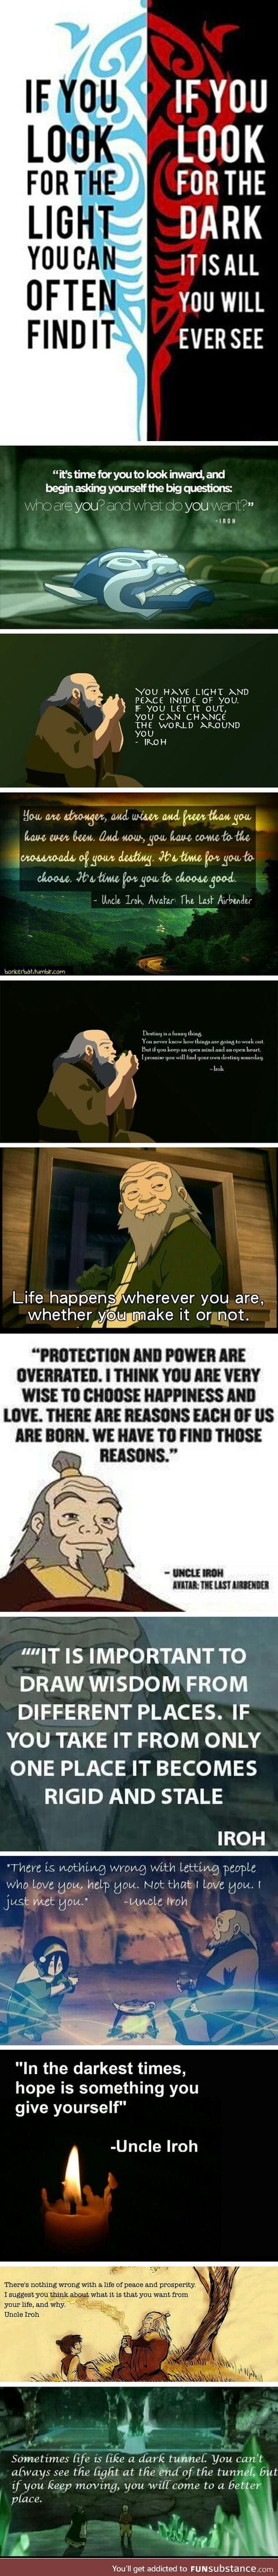 The wise words of Iroh